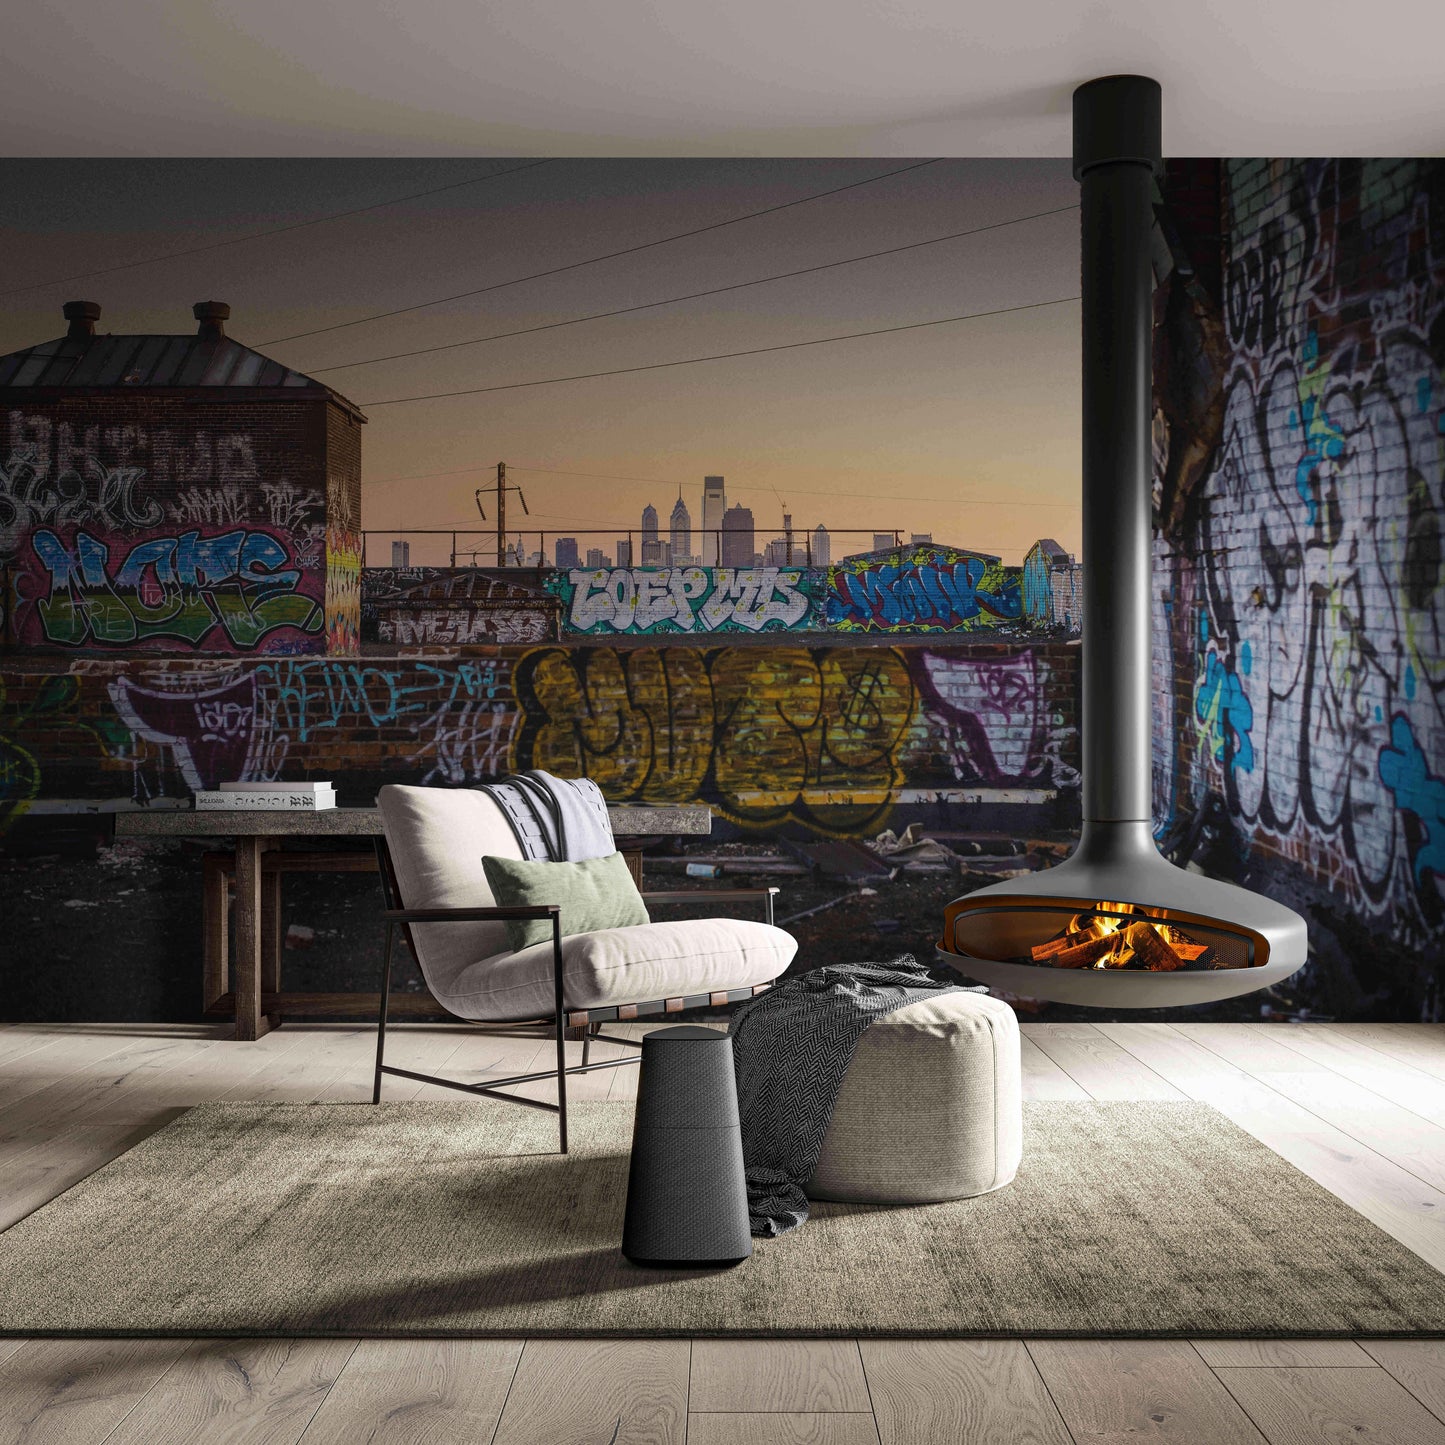 Vibrant grunge wall mural featuring eclectic street art designs